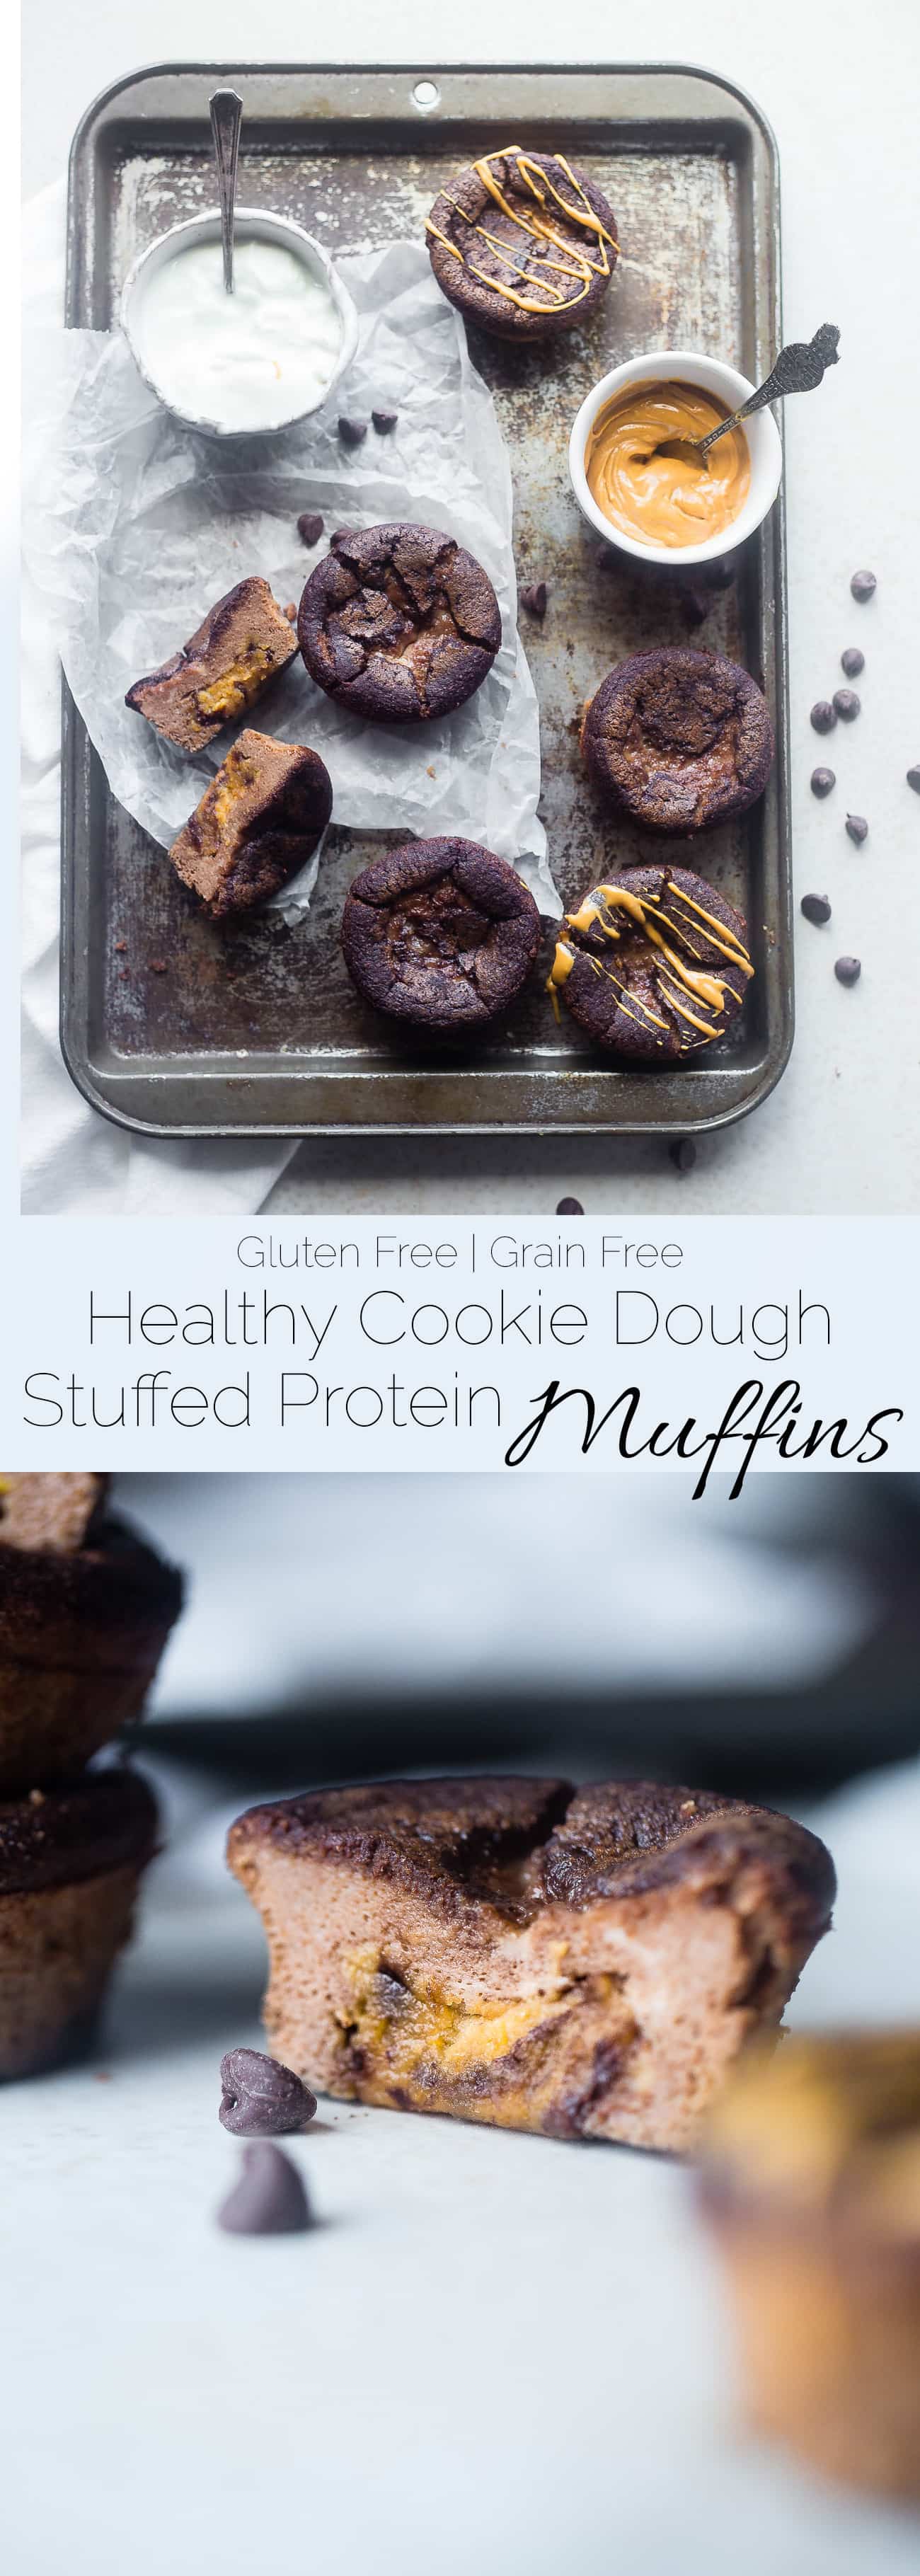 Cookie Dough Chocolate Egg Muffins - These 150 calorie, cookie dough stuffed muffins use a secret ingredient to makes them gluten free and protein packed! An easy, healthy snack or portable breakfast for busy mornings! | Foodfaithfitness.com | @FoodFaithFit